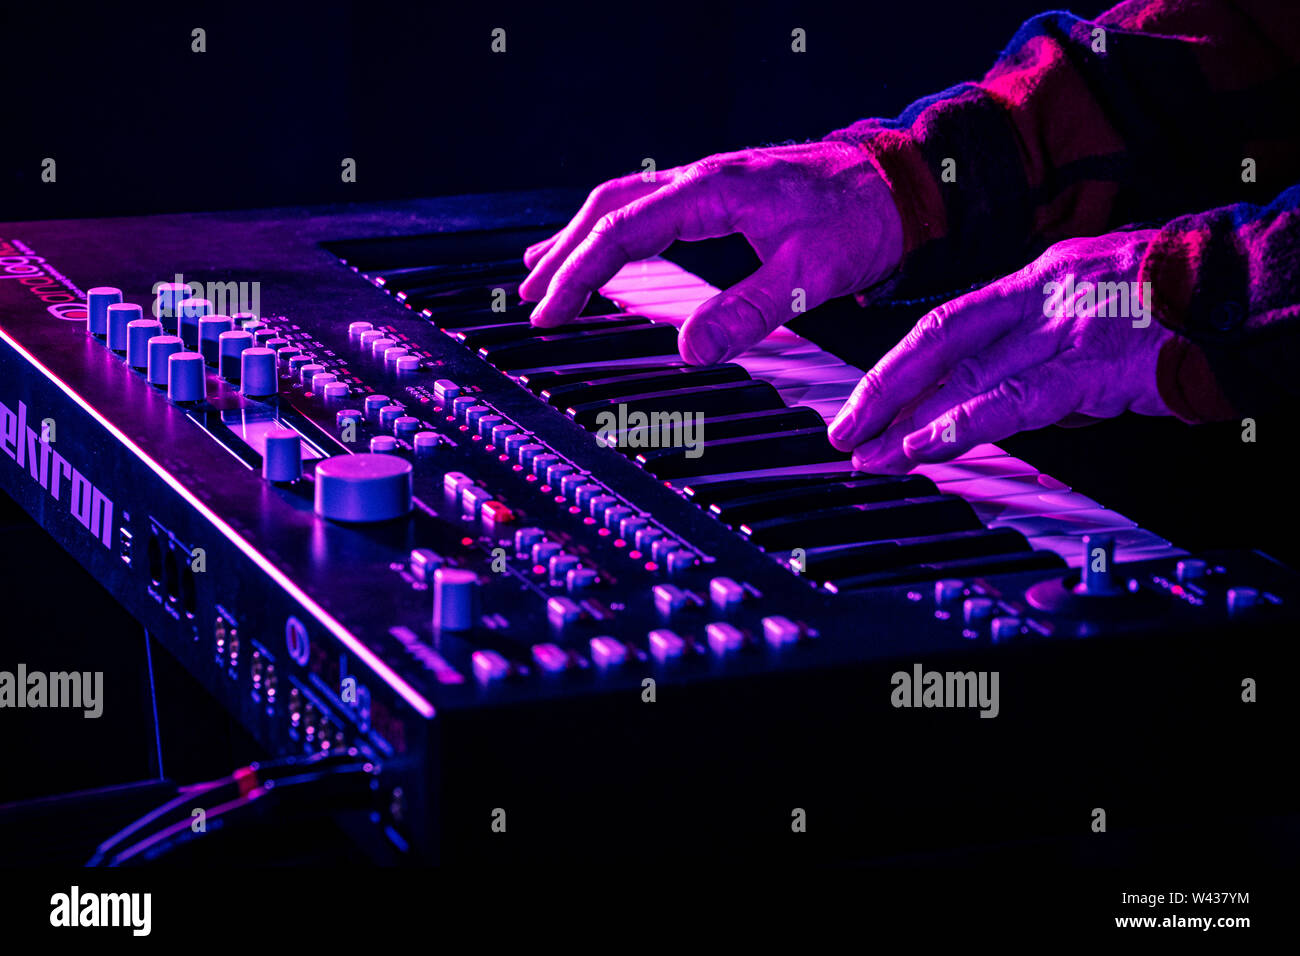 Closeup of male hands playing a modern synthesizer keyboard under stage lighting. Stock Photo